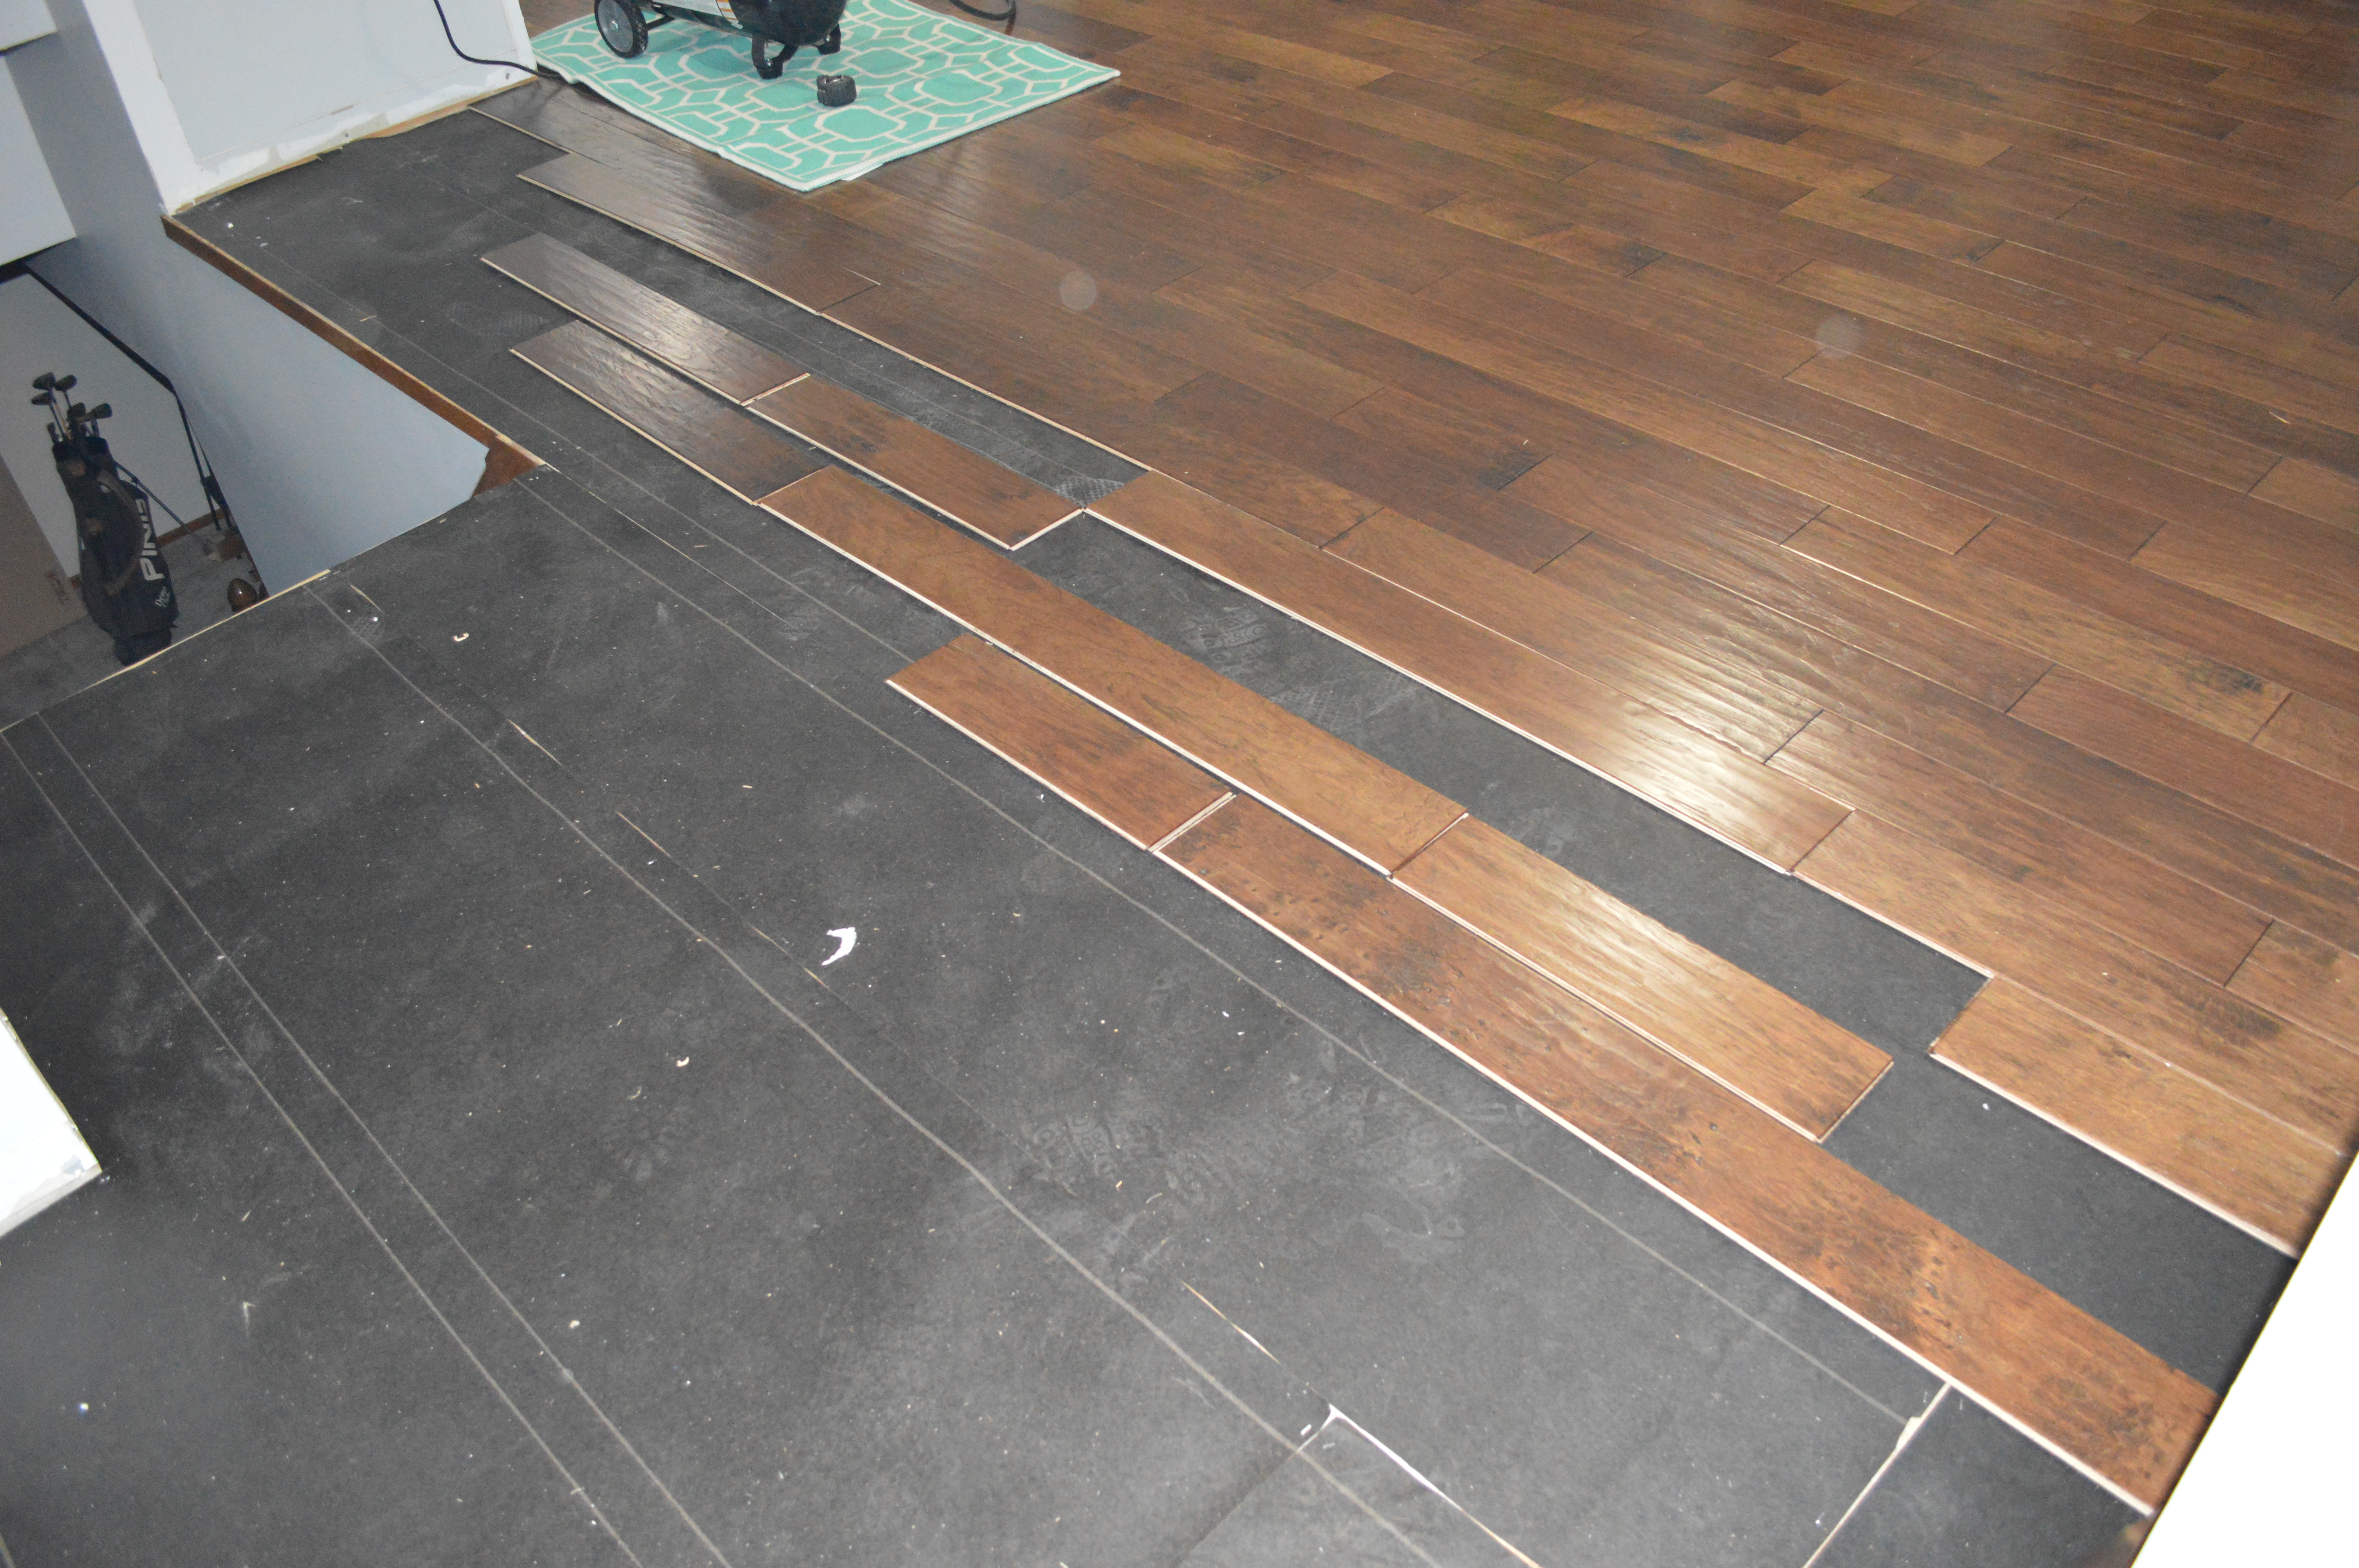 What We Learned About Laying Hardwood Flooring Part 1 Loving Here